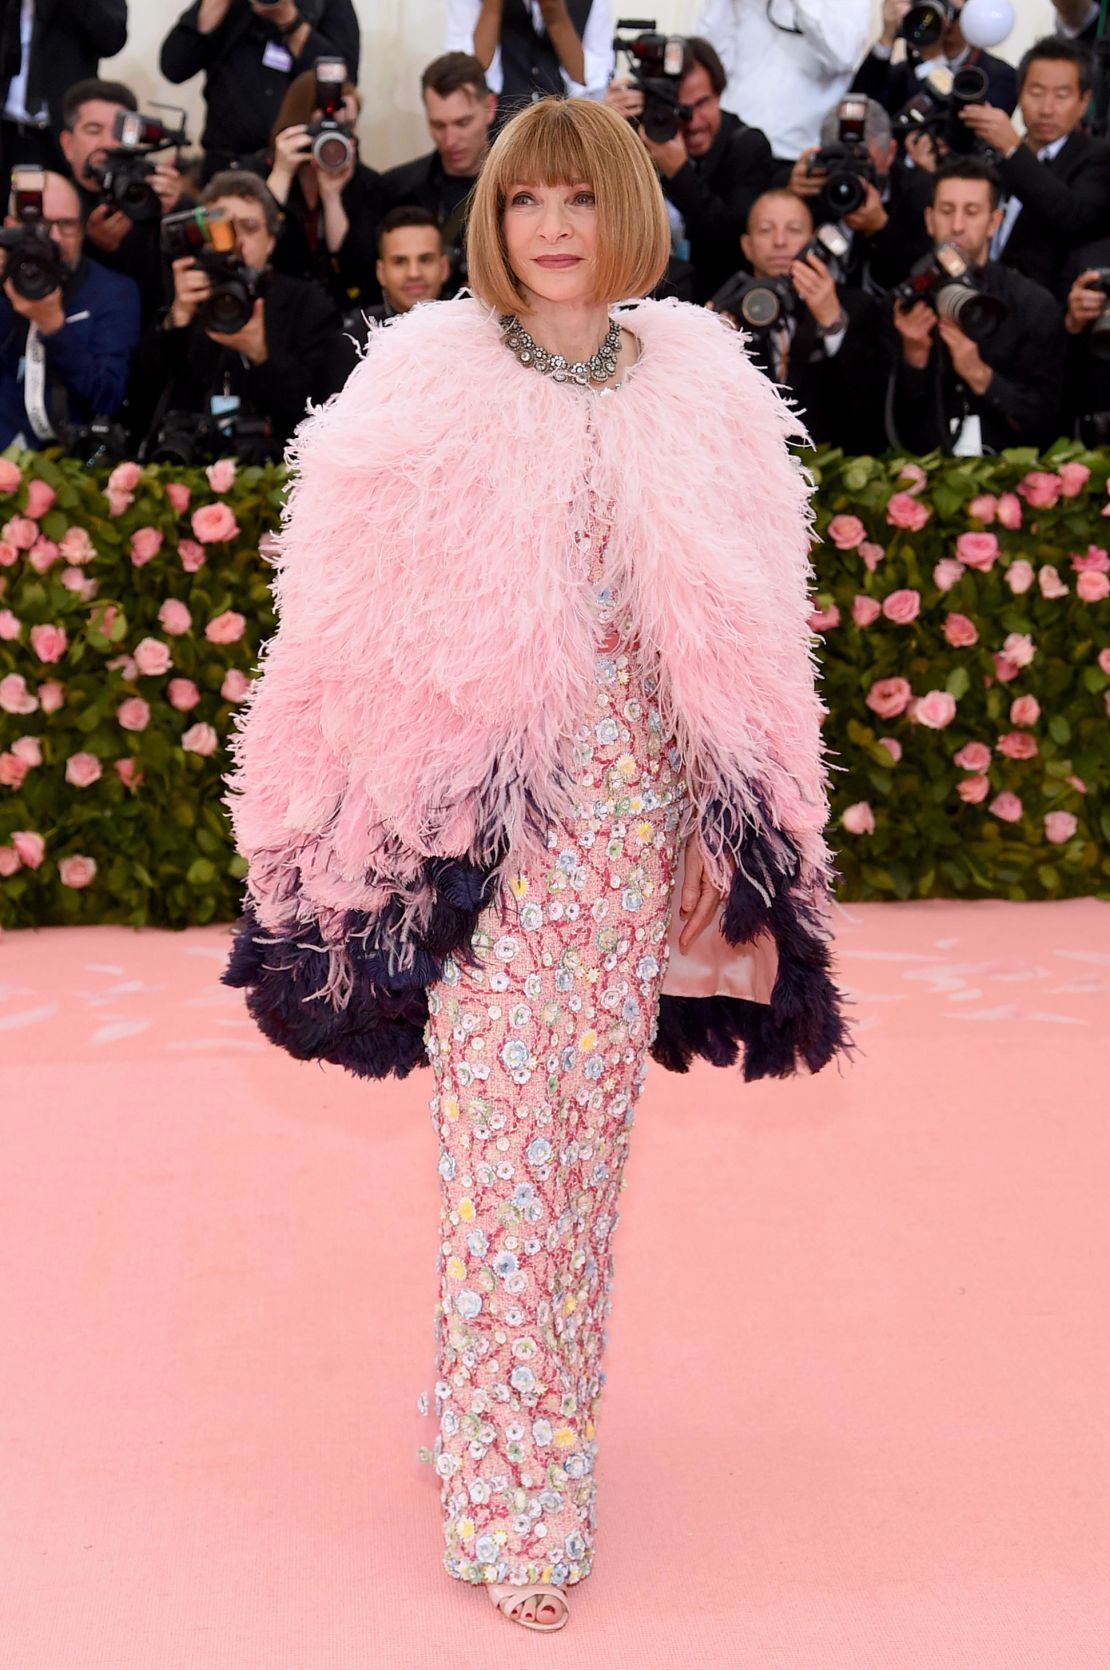 Anna Wintour pictured at this year's Met Gala.